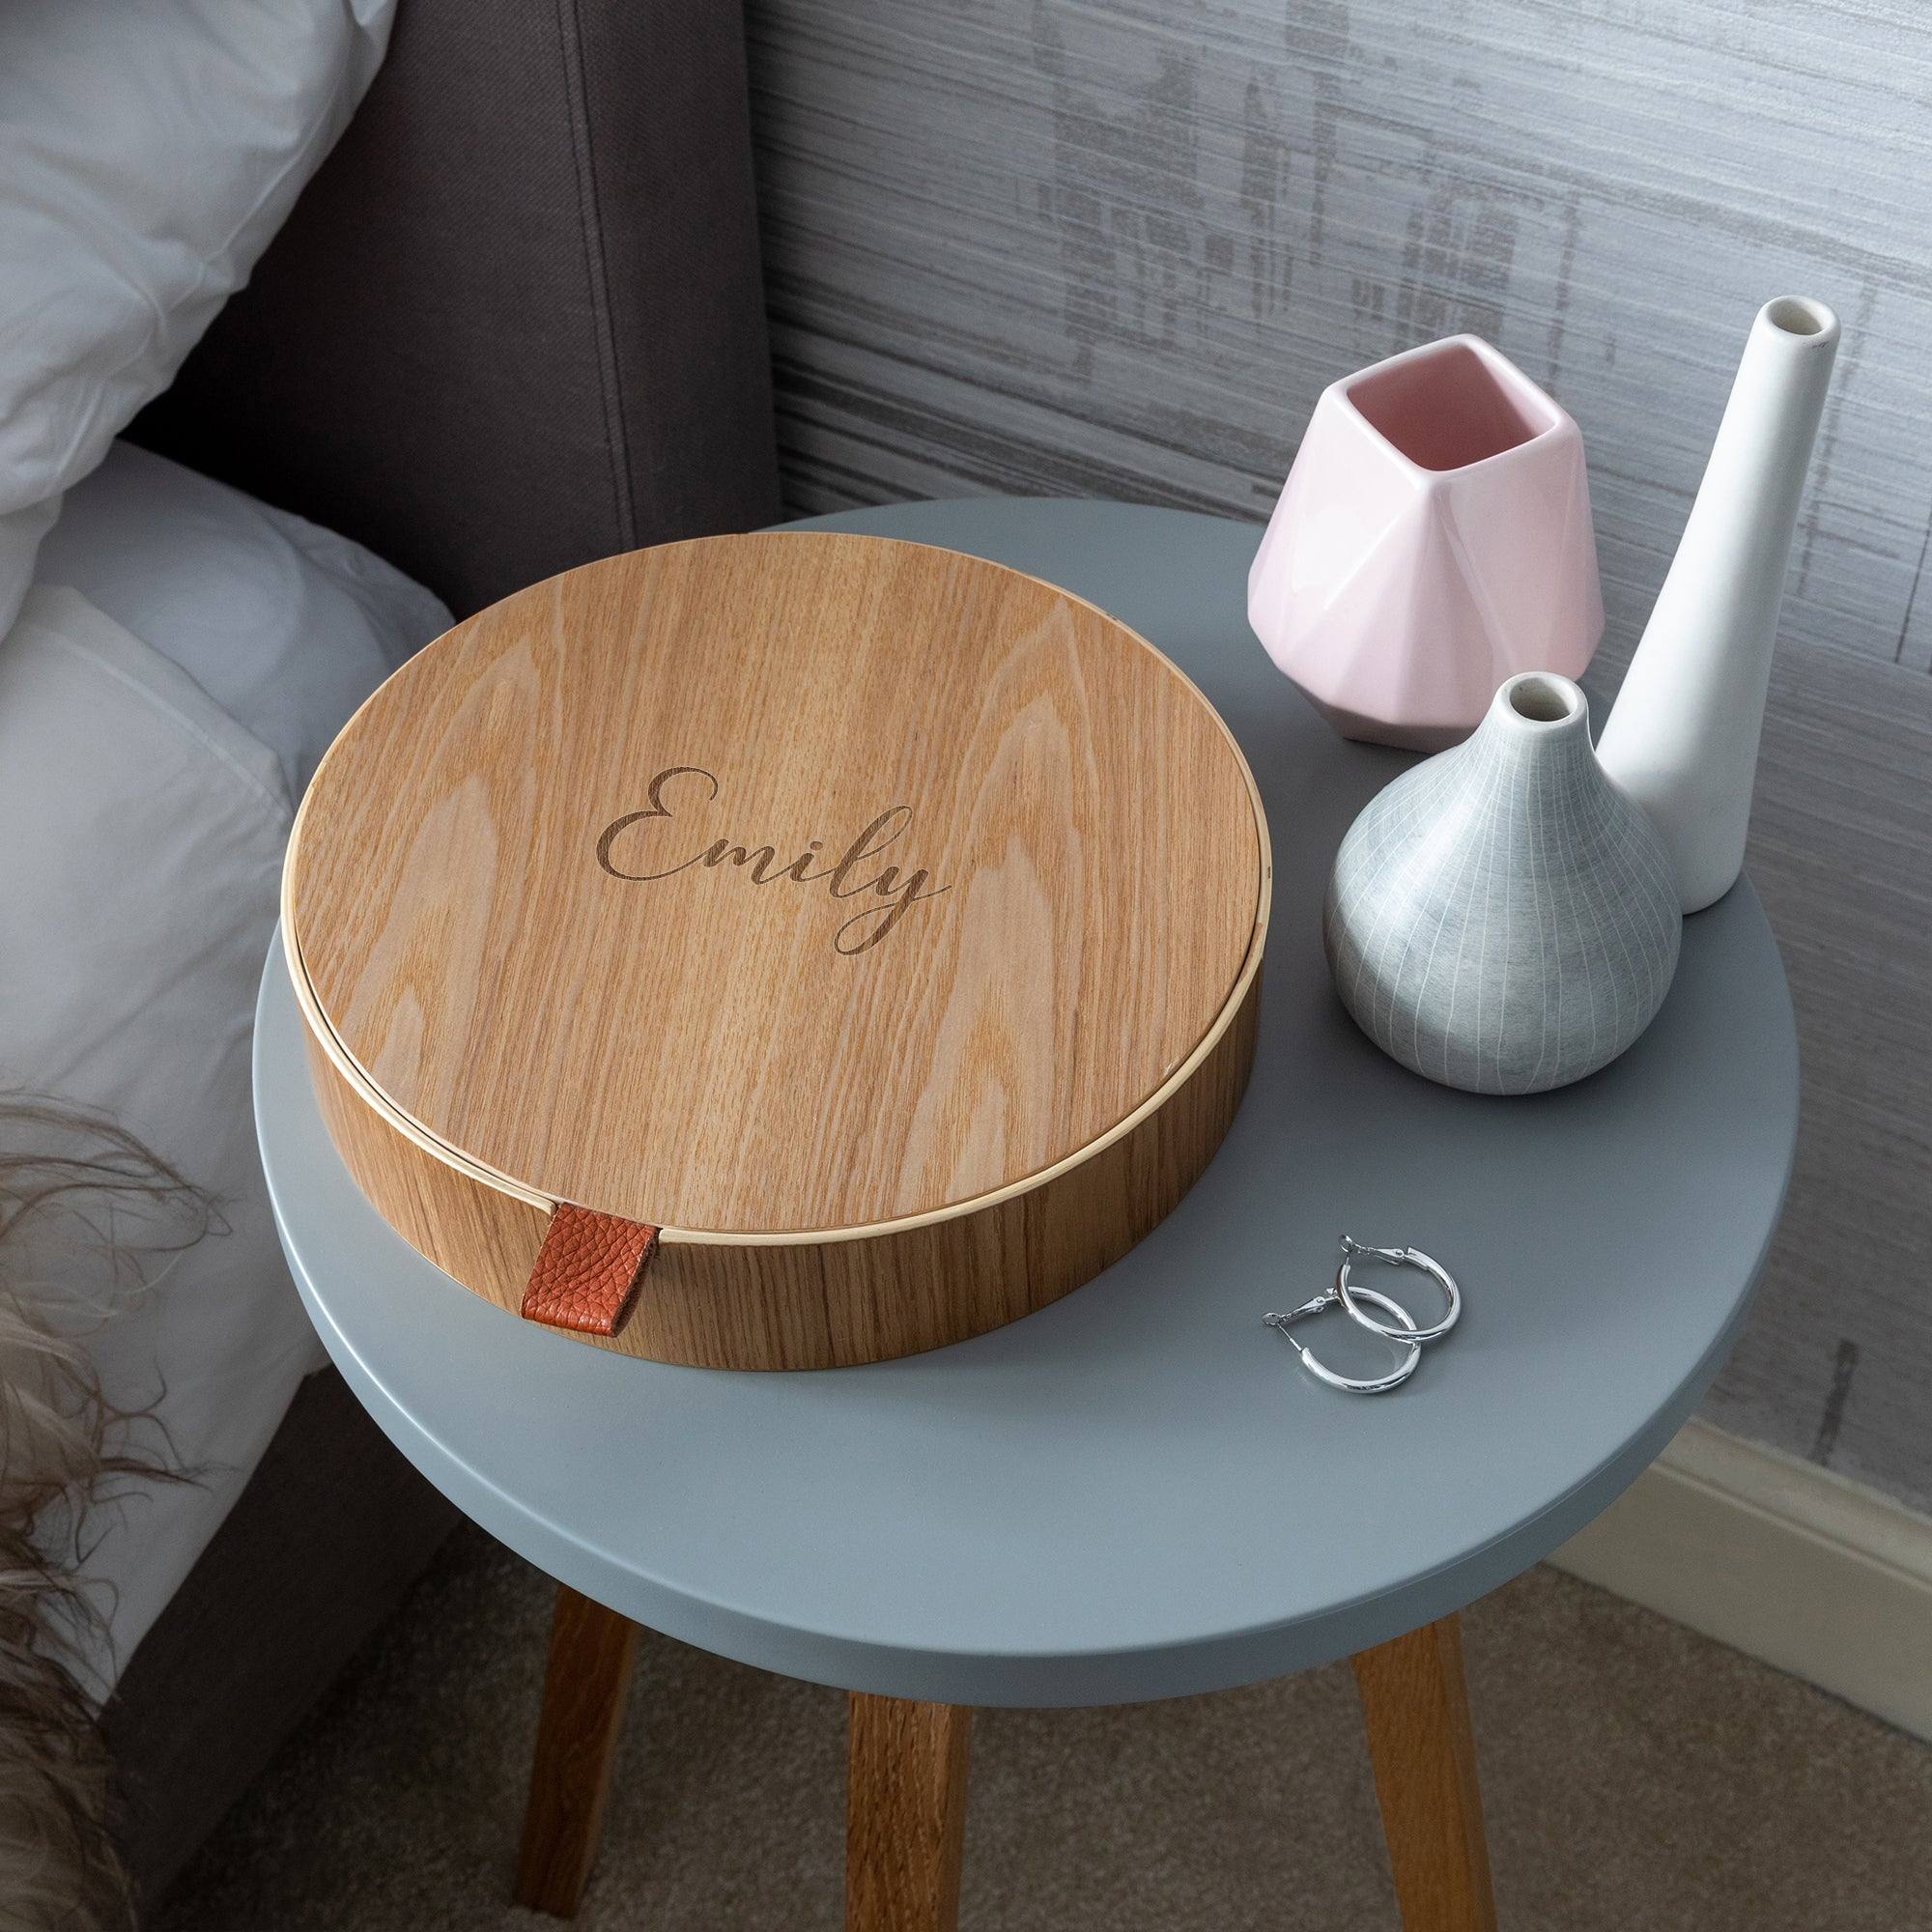 39 Personalised Wedding Gift Ideas for Every Kind of Couple - hitched.co.uk  - hitched.co.uk